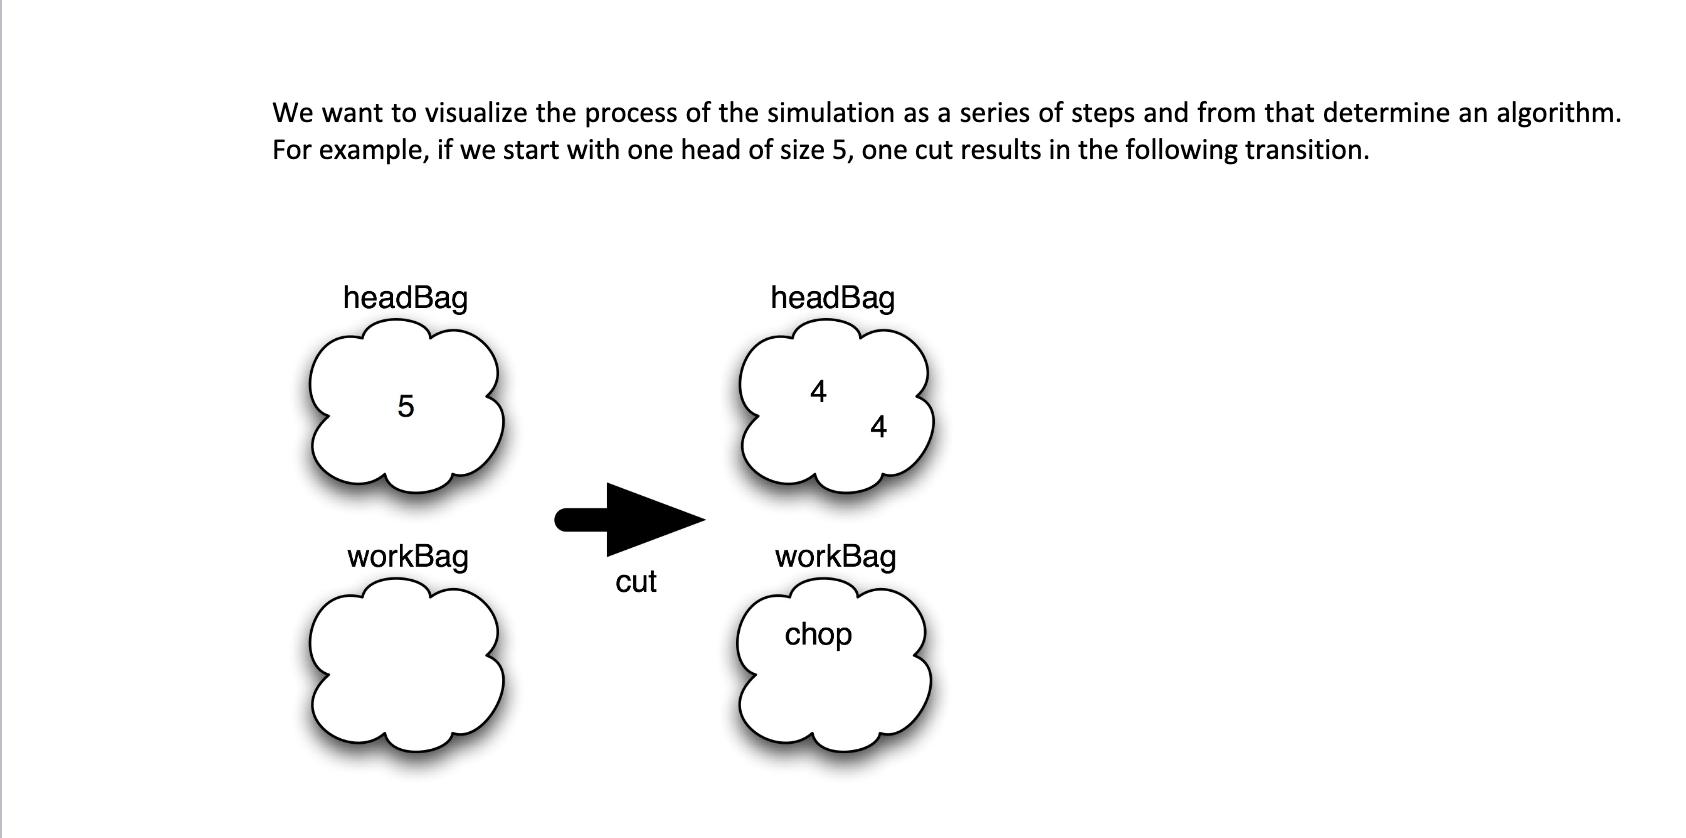 We want to visualize the process of the simulation as a series of steps and from that determine an algorithm.